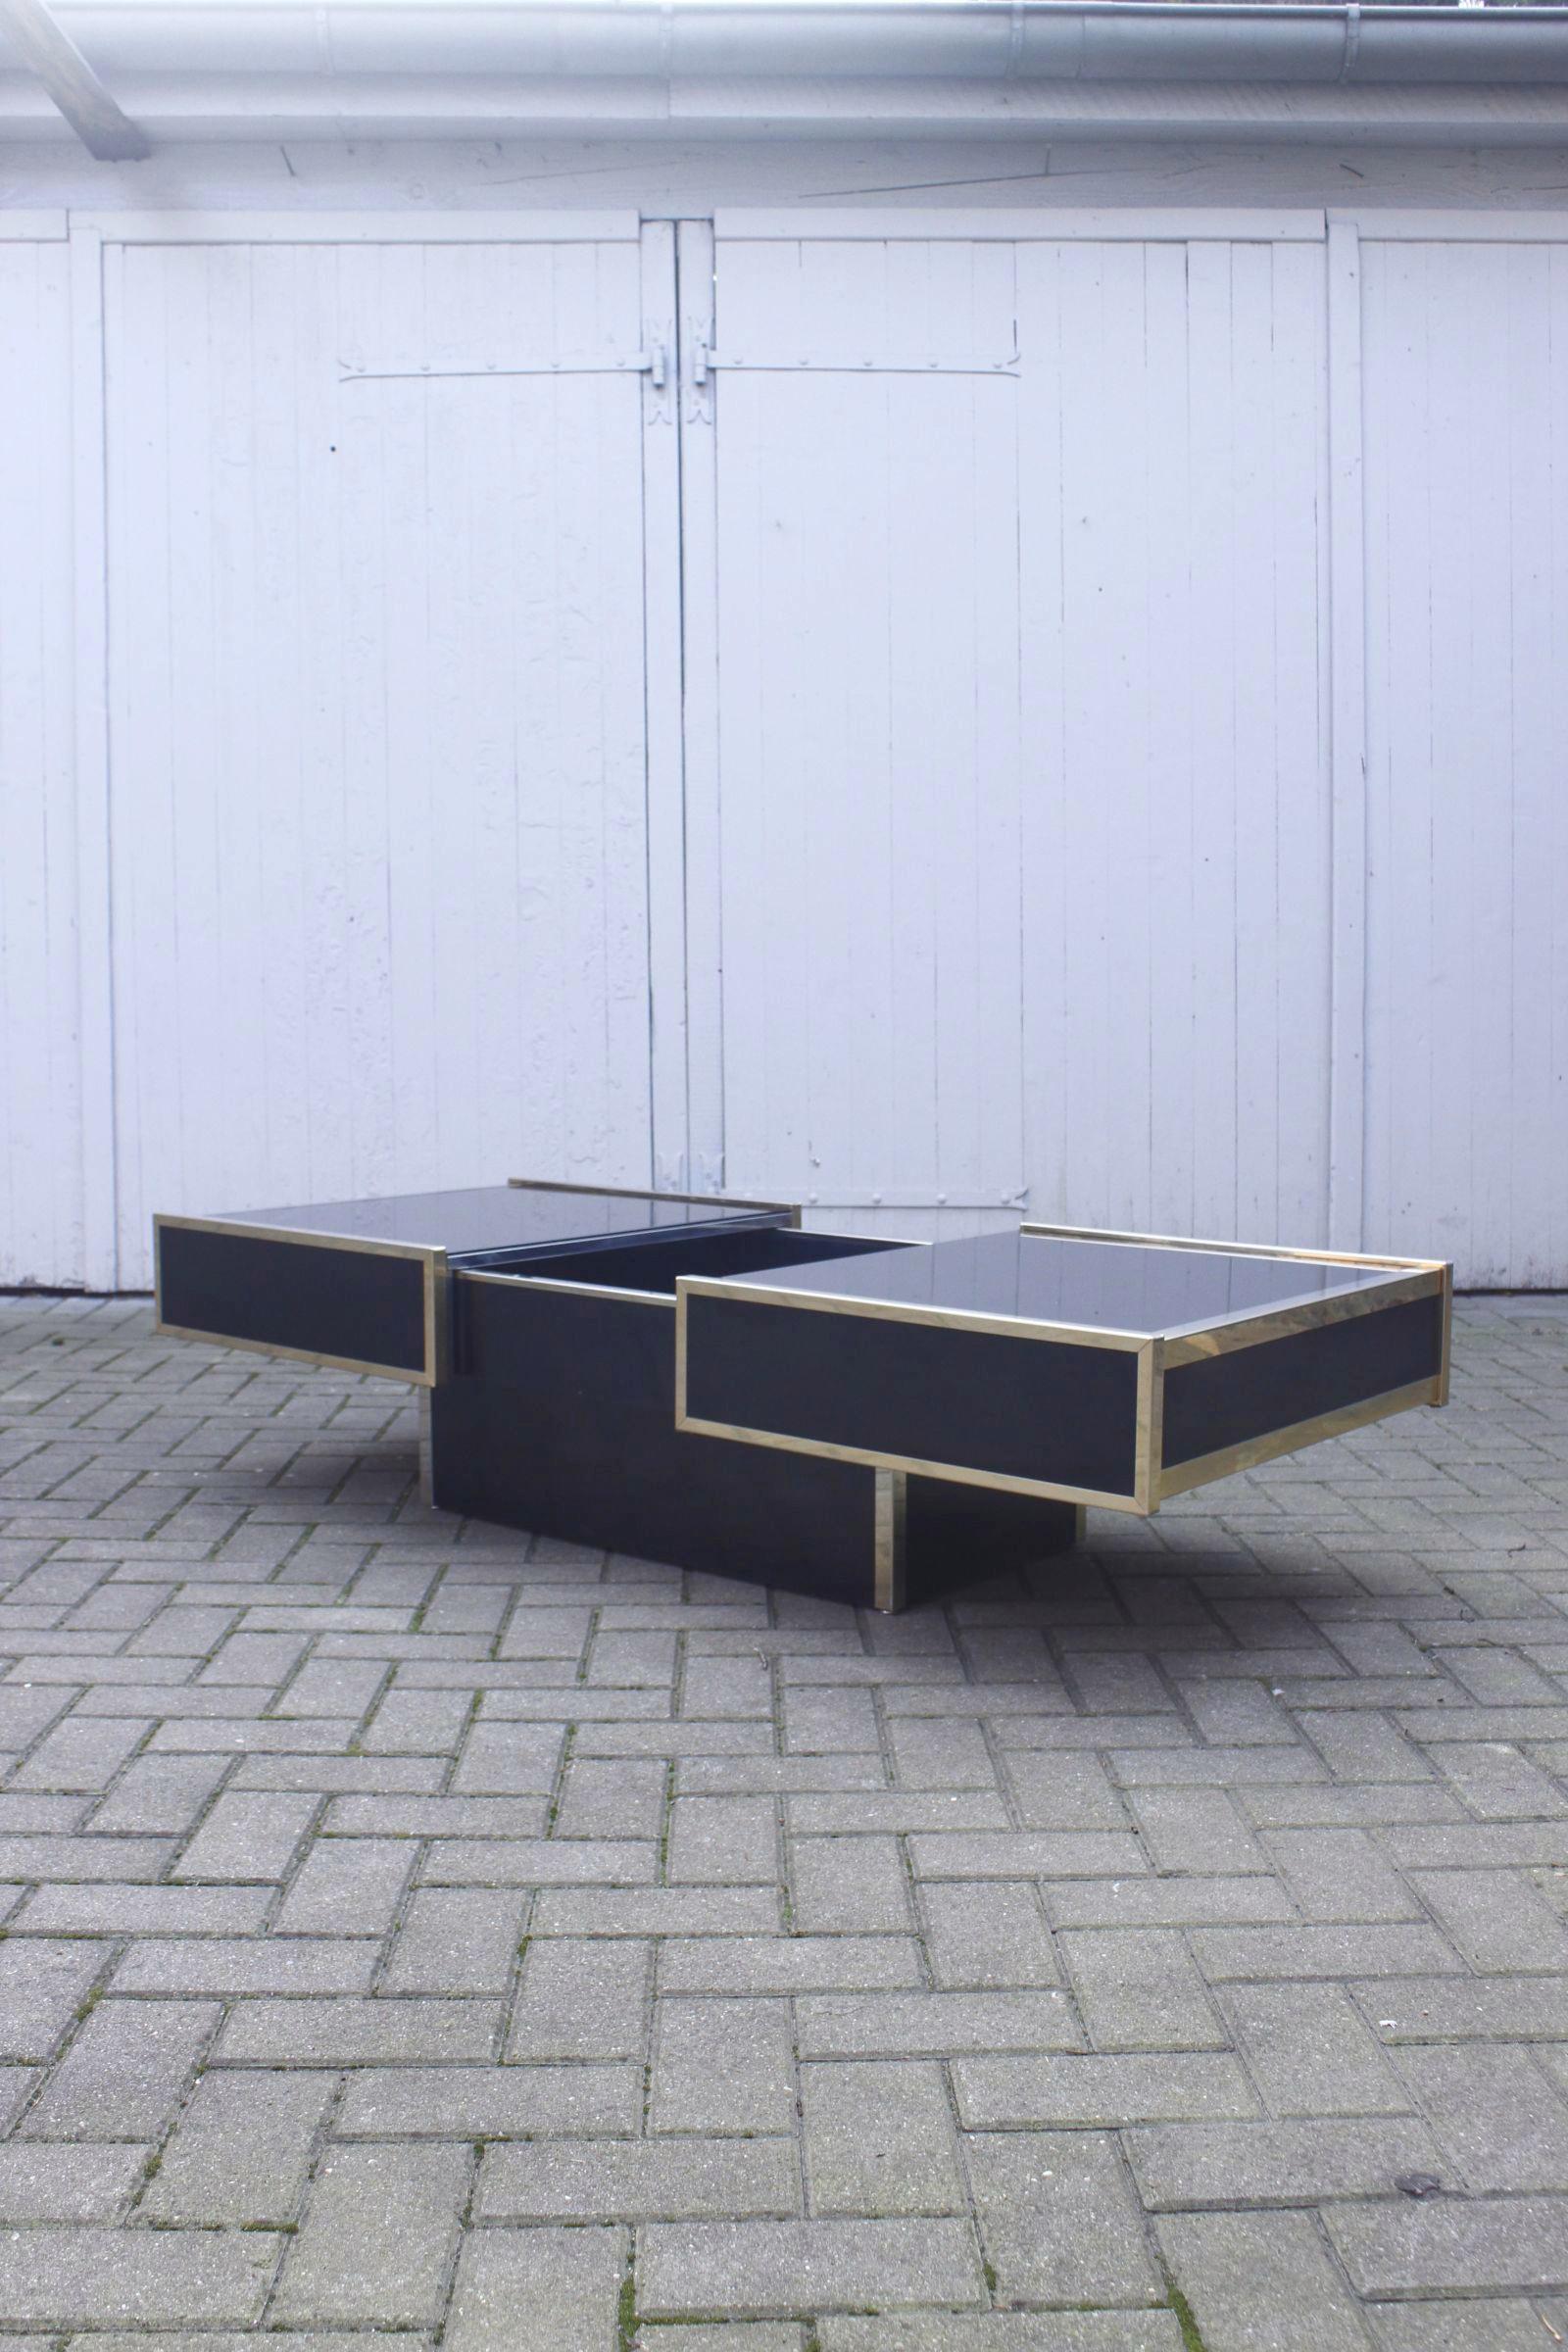 Beautiful coffee table with hidden bar by Maison Lancel Paris, circa 1970.

The frame is in gilded metal, the top in glass, the interior part for storing bottles and glasses is in chrome metal, the contours and base are in glossy black melamine